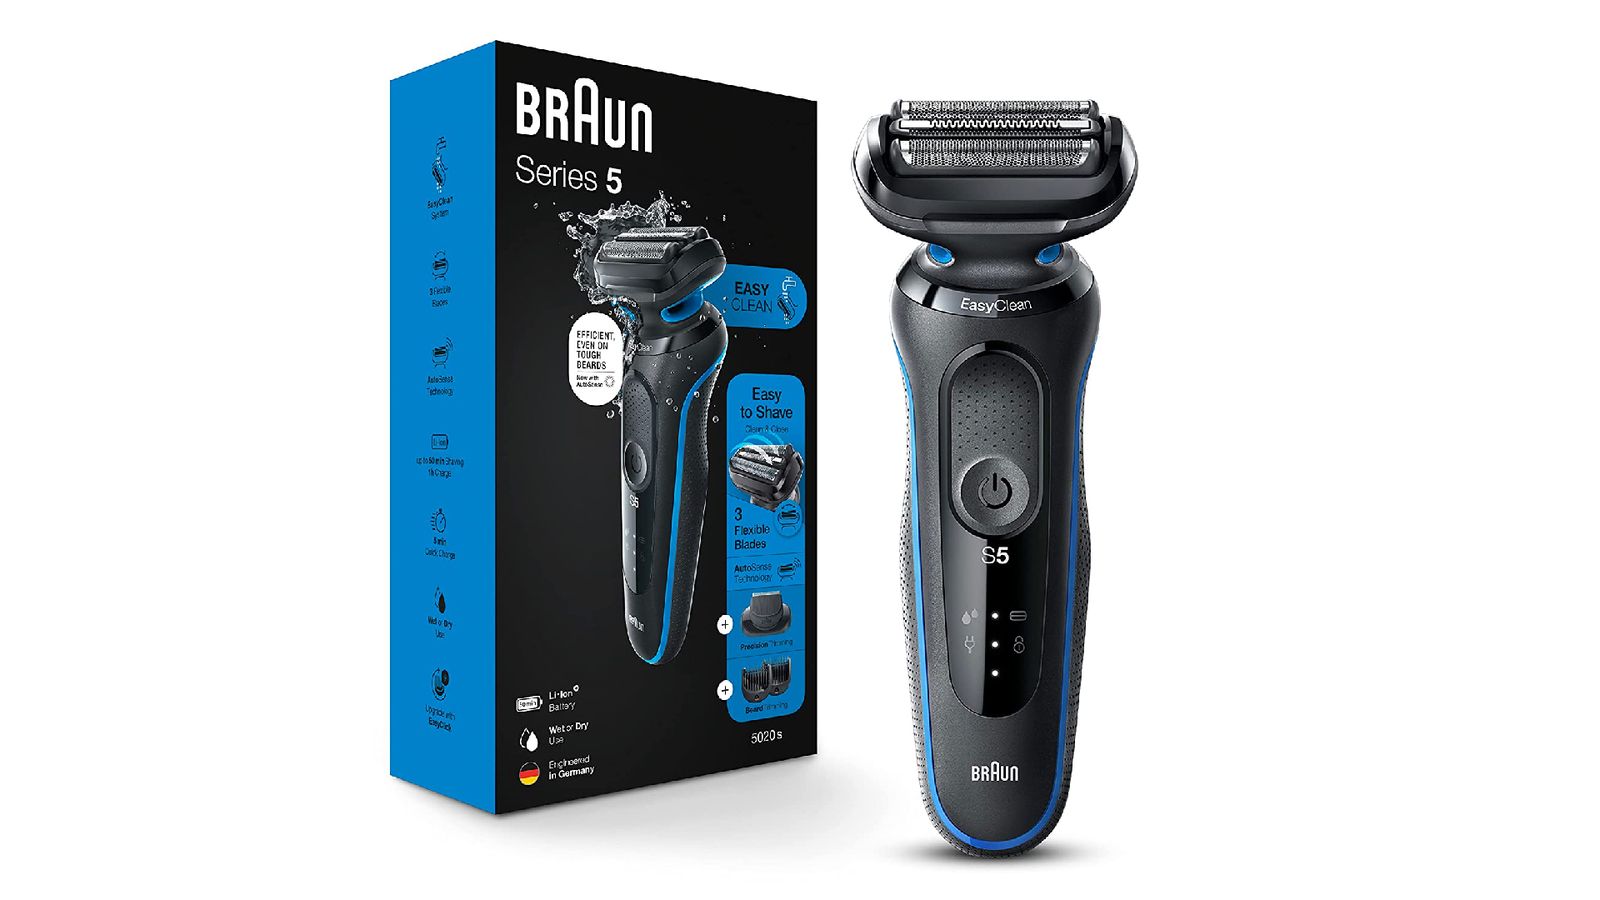 Best tech gift ideas - Braun product image of a blue and black electric razor.